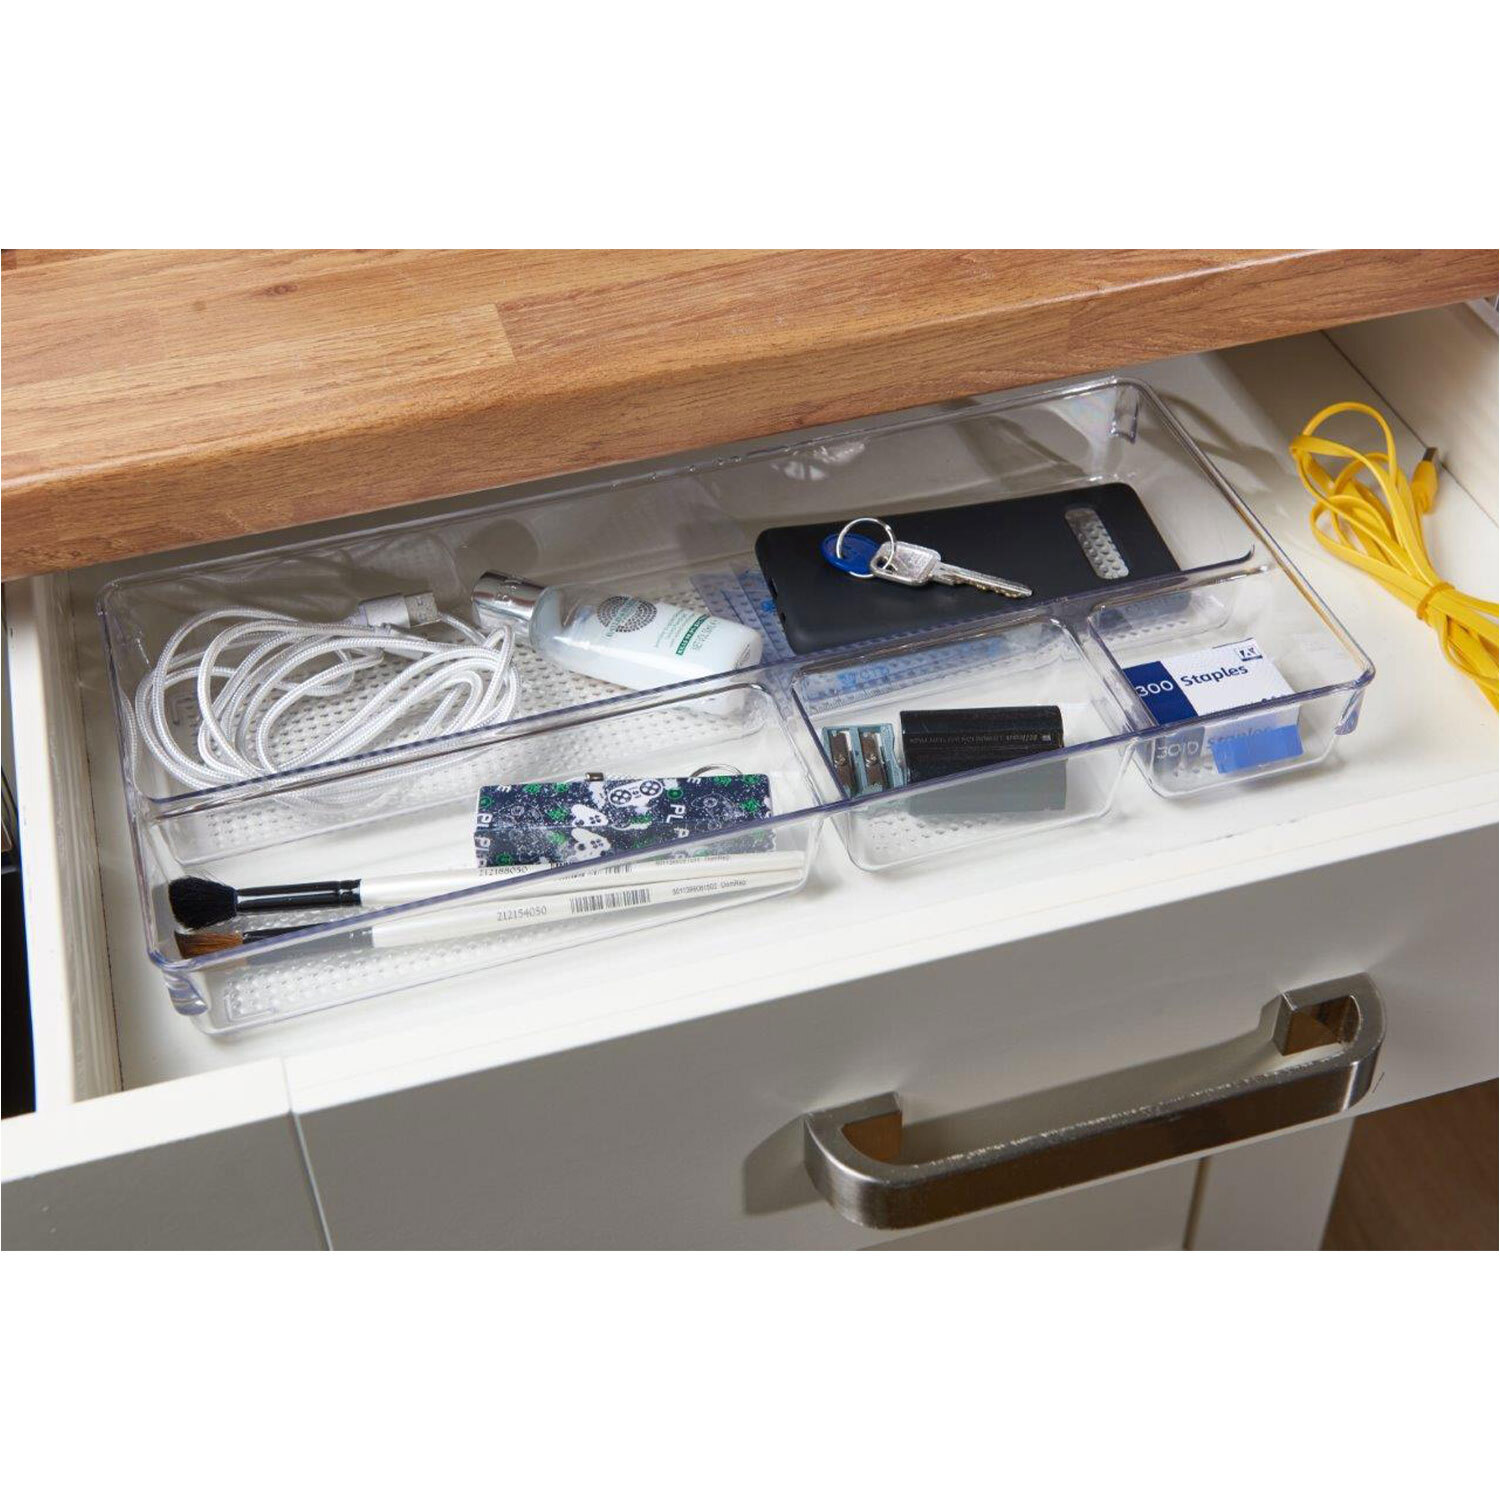 4 Compartment Drawer Organiser Image